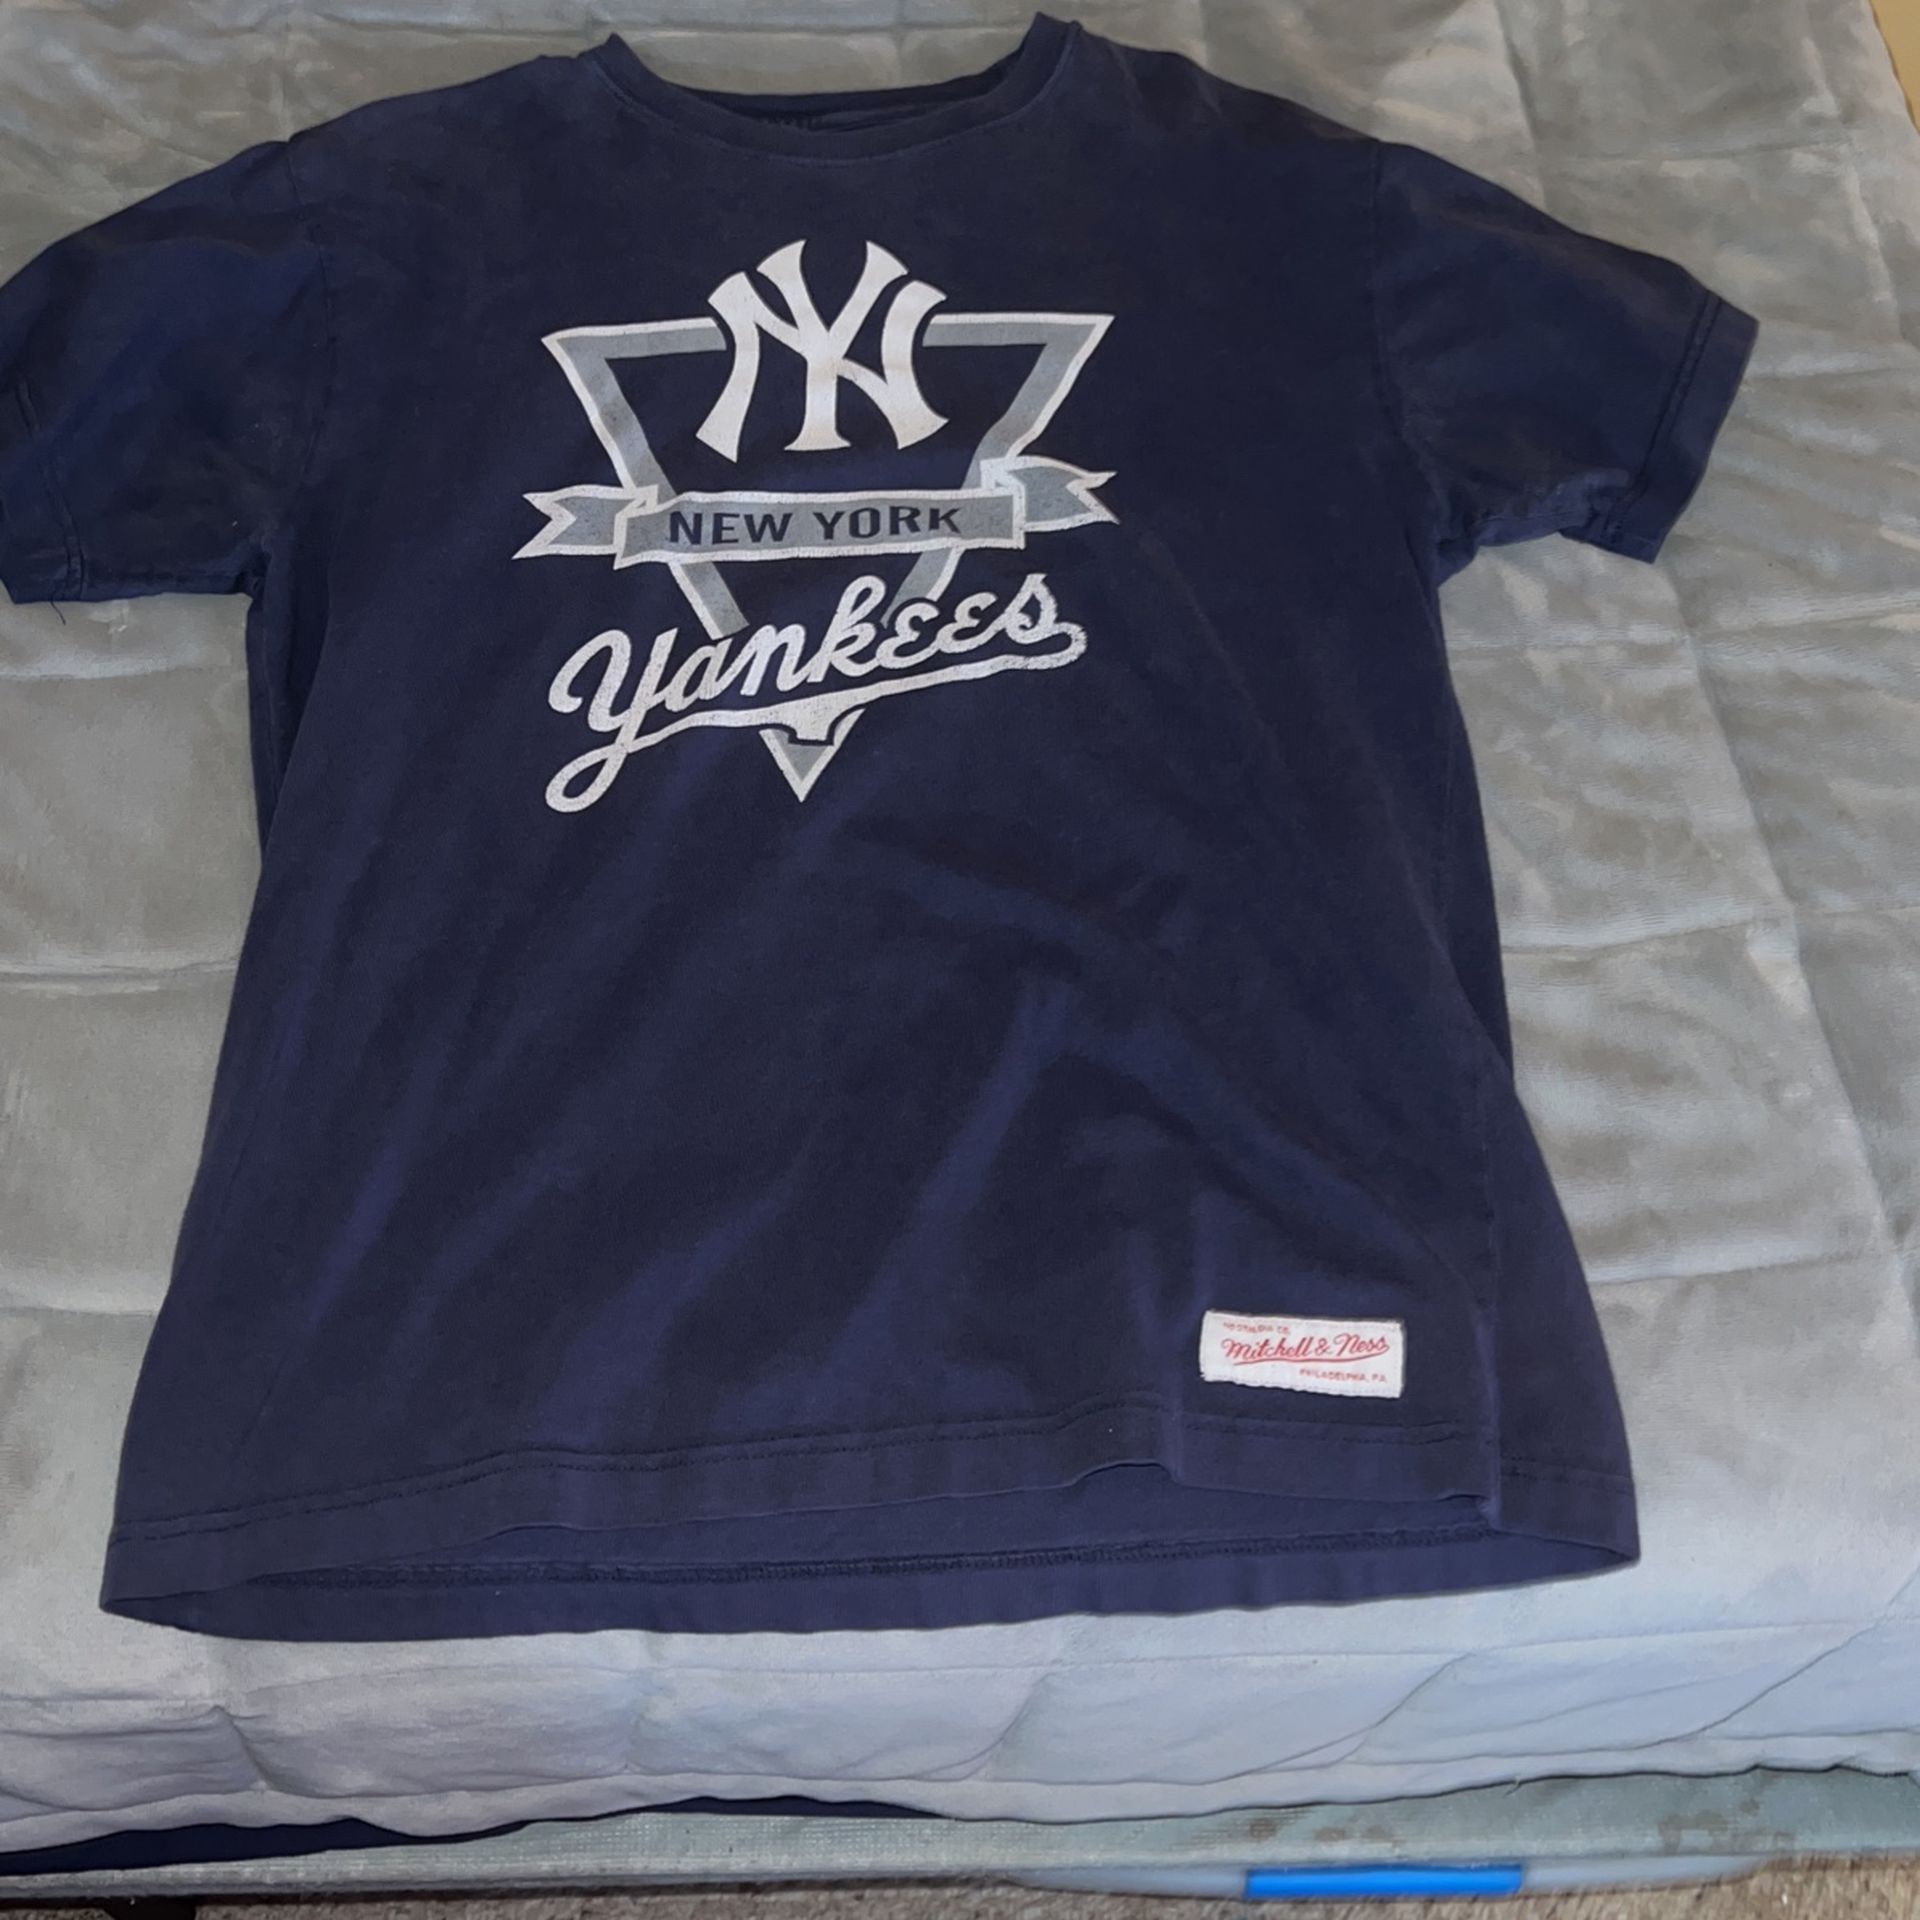 Yankees Tee (Men's Large) for Sale in Albany, NY - OfferUp